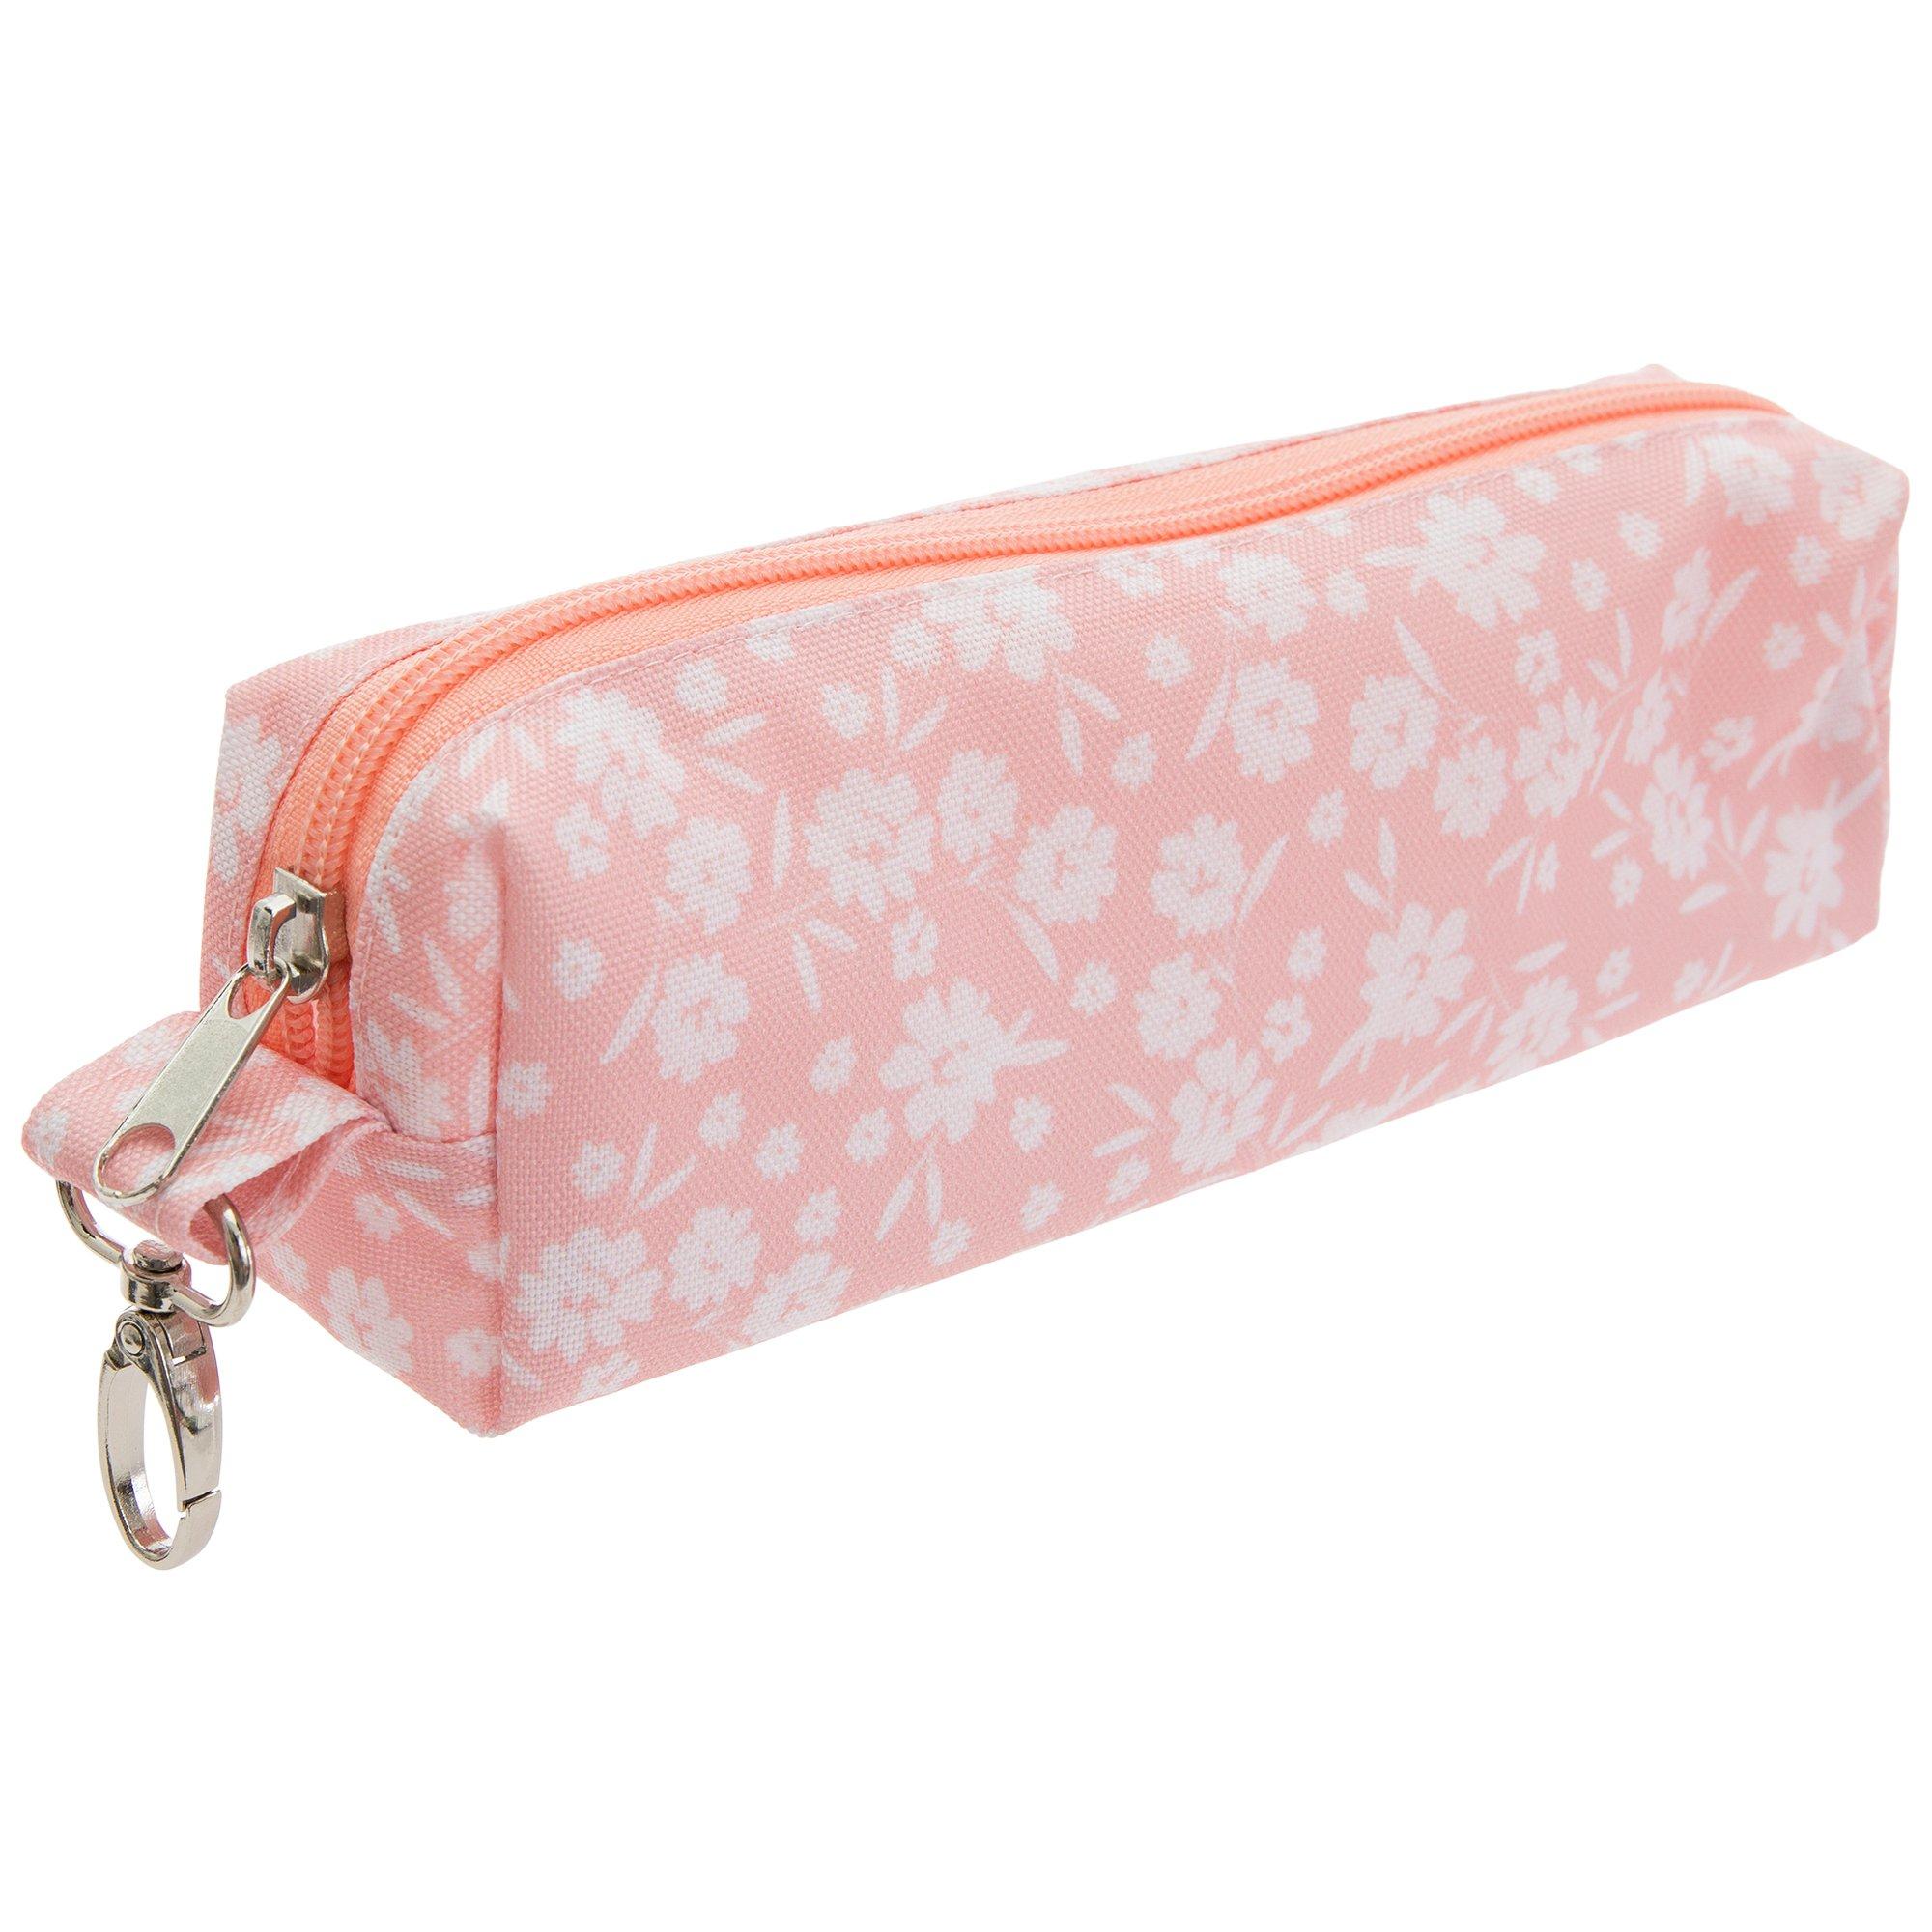 Hobby Lobby Zipper Pouches for Sale